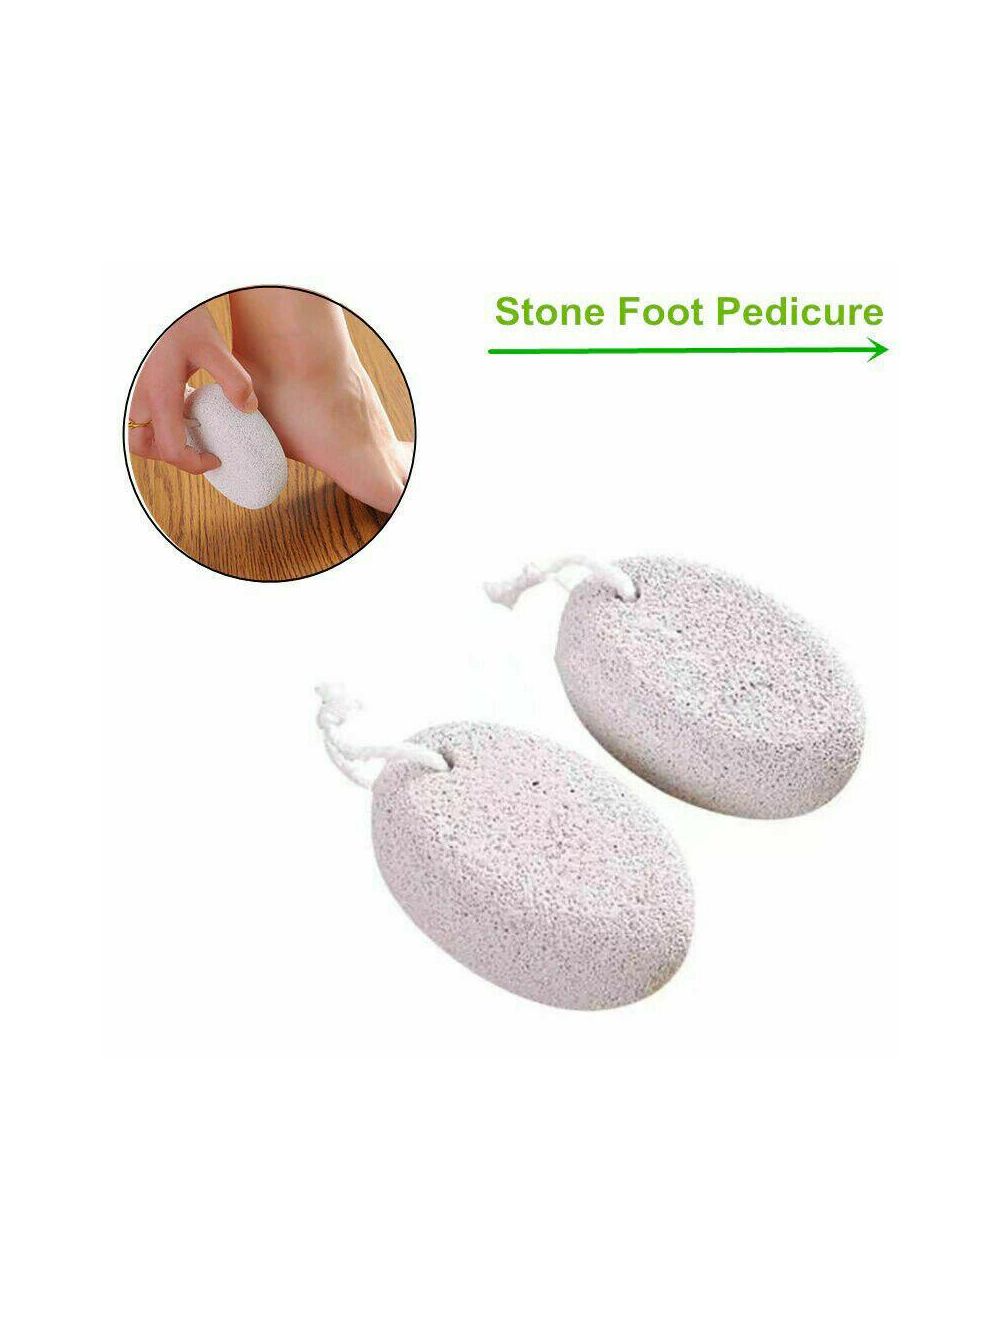 Simple Feet Cleaner,Evermarket Magic Foot Scrubber,Exfoliating Easy Feet  Cleaning Brush,Feet Washer Foot Shower Spa Massager Slippers for Unisex  Adults Foot Scrubber Slipper